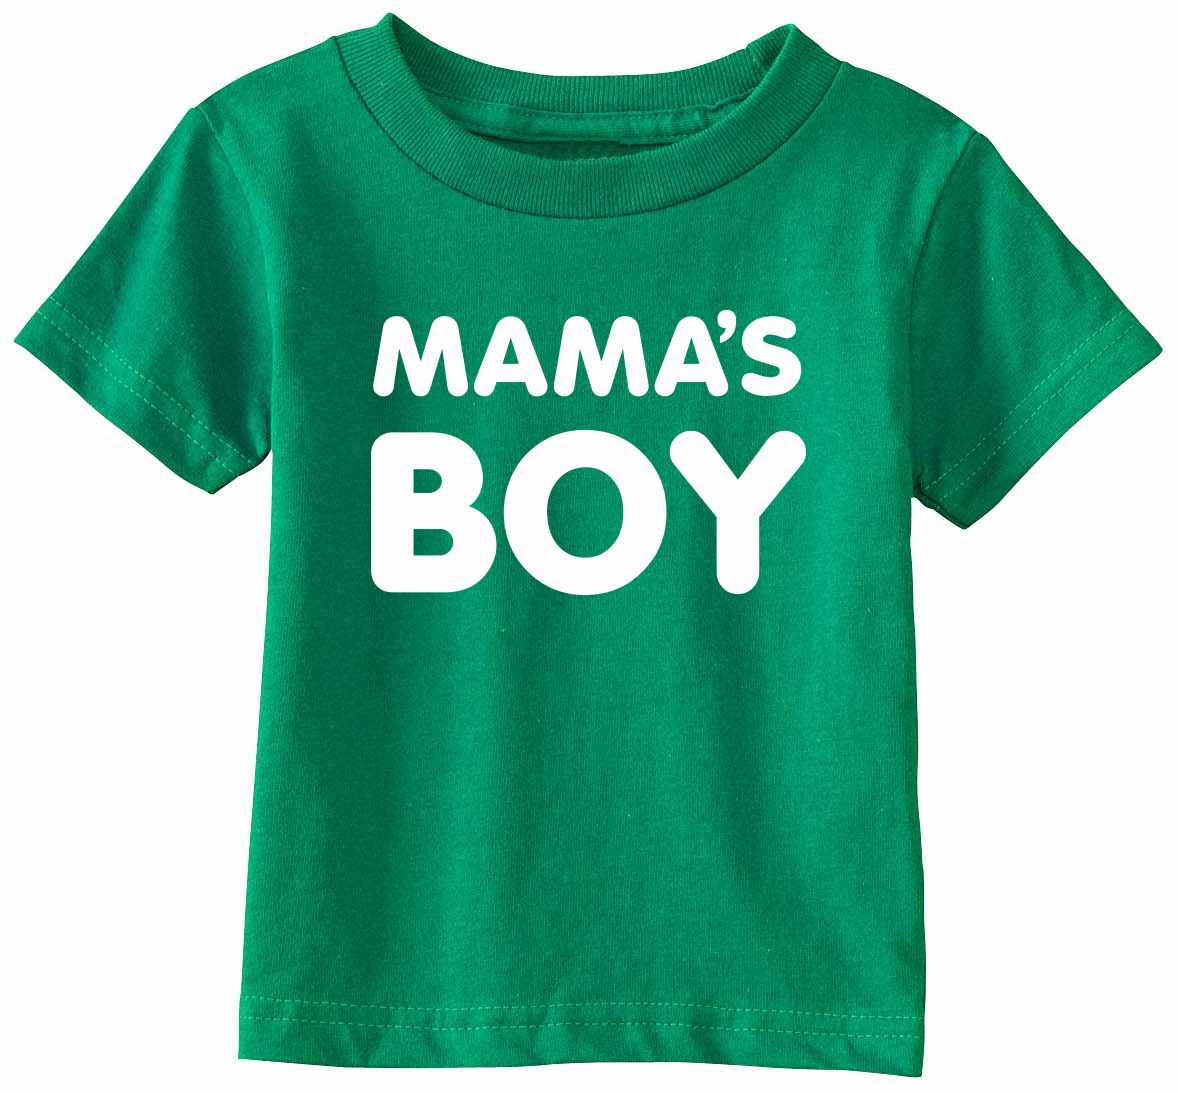 MAMA'S BOY on Infant-Toddler T-Shirt